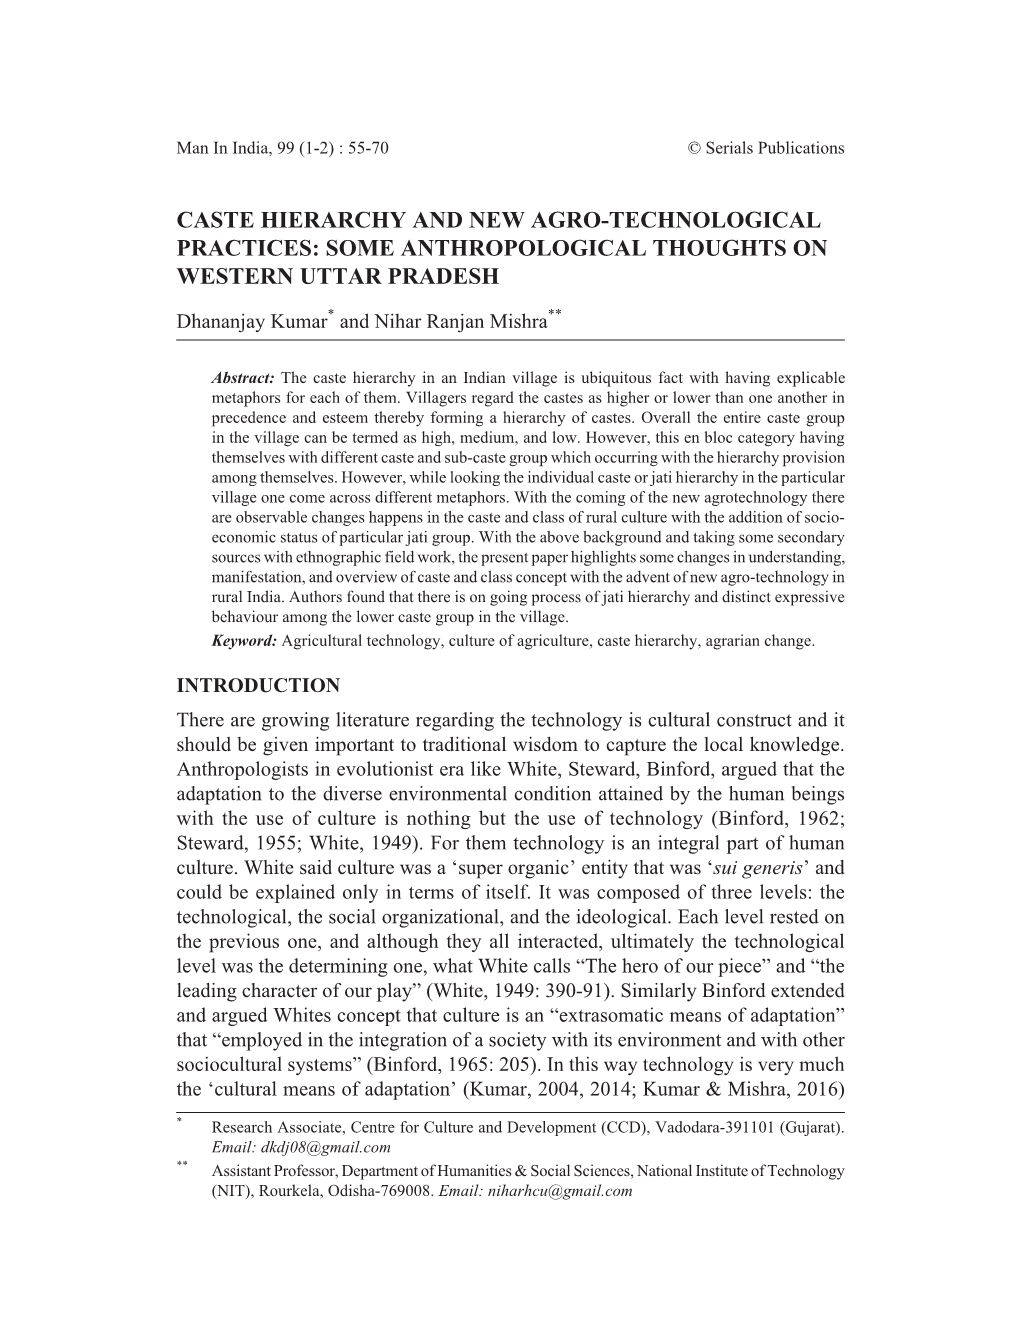 Caste Hierarchy and New Agro-Technological Practices: Some Anthropological Thoughts on Western Uttar Pradesh